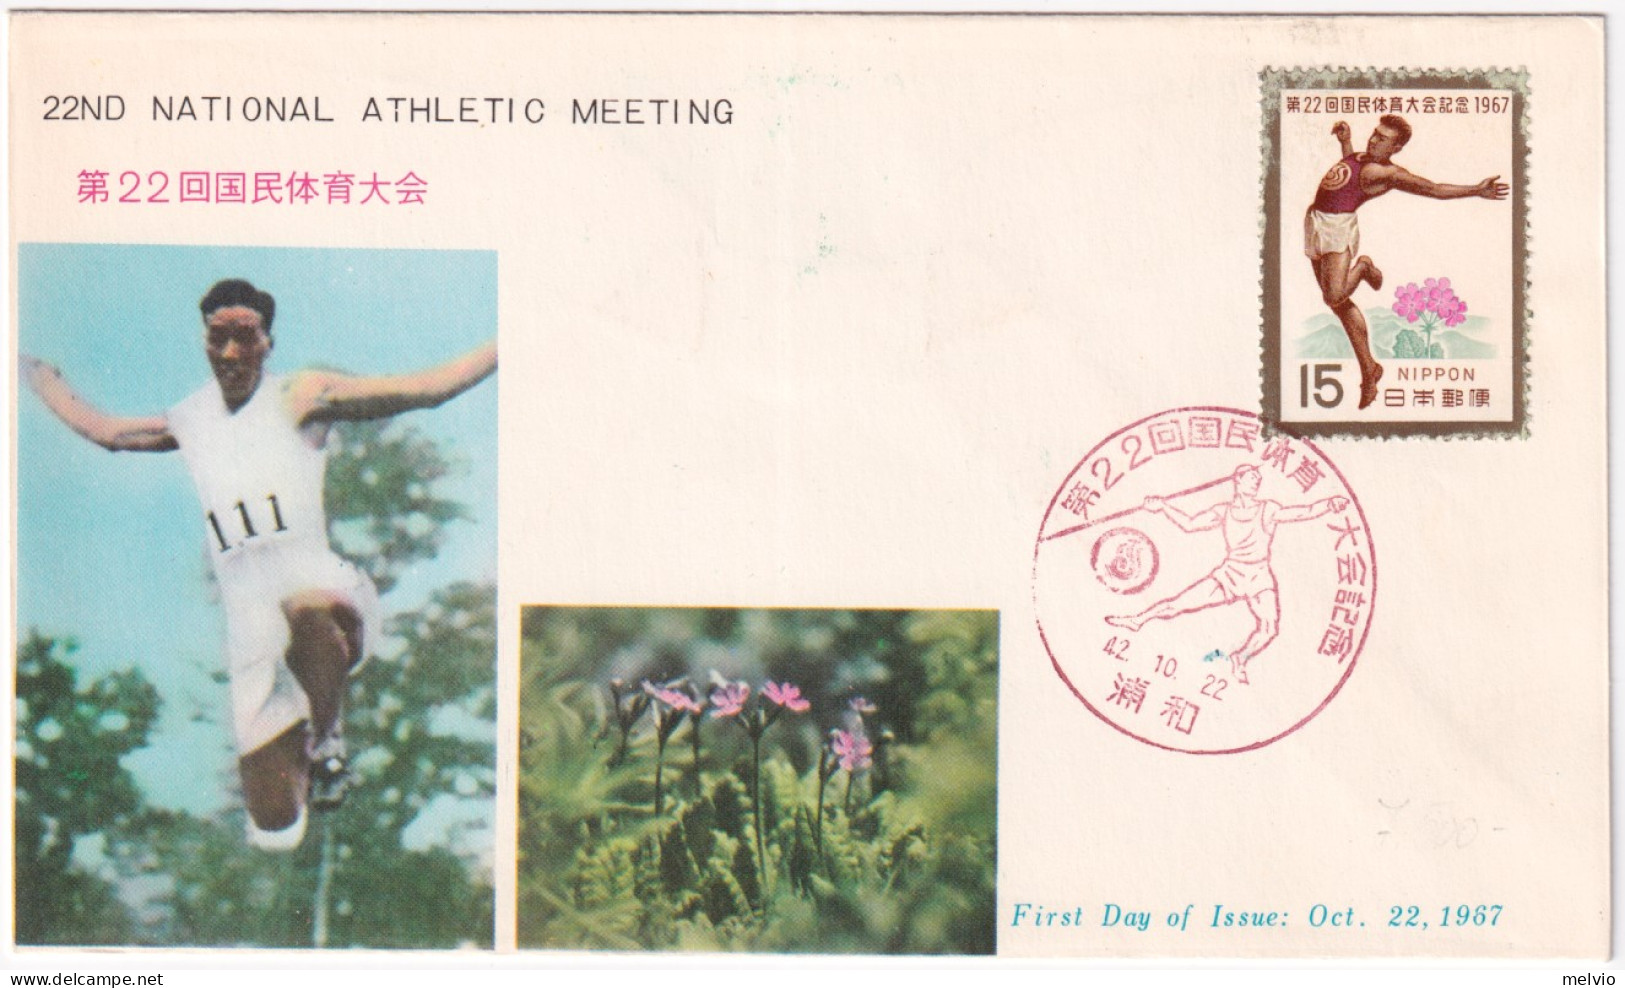 1967-Giappone 22 Meeting Atletica (885) fdc